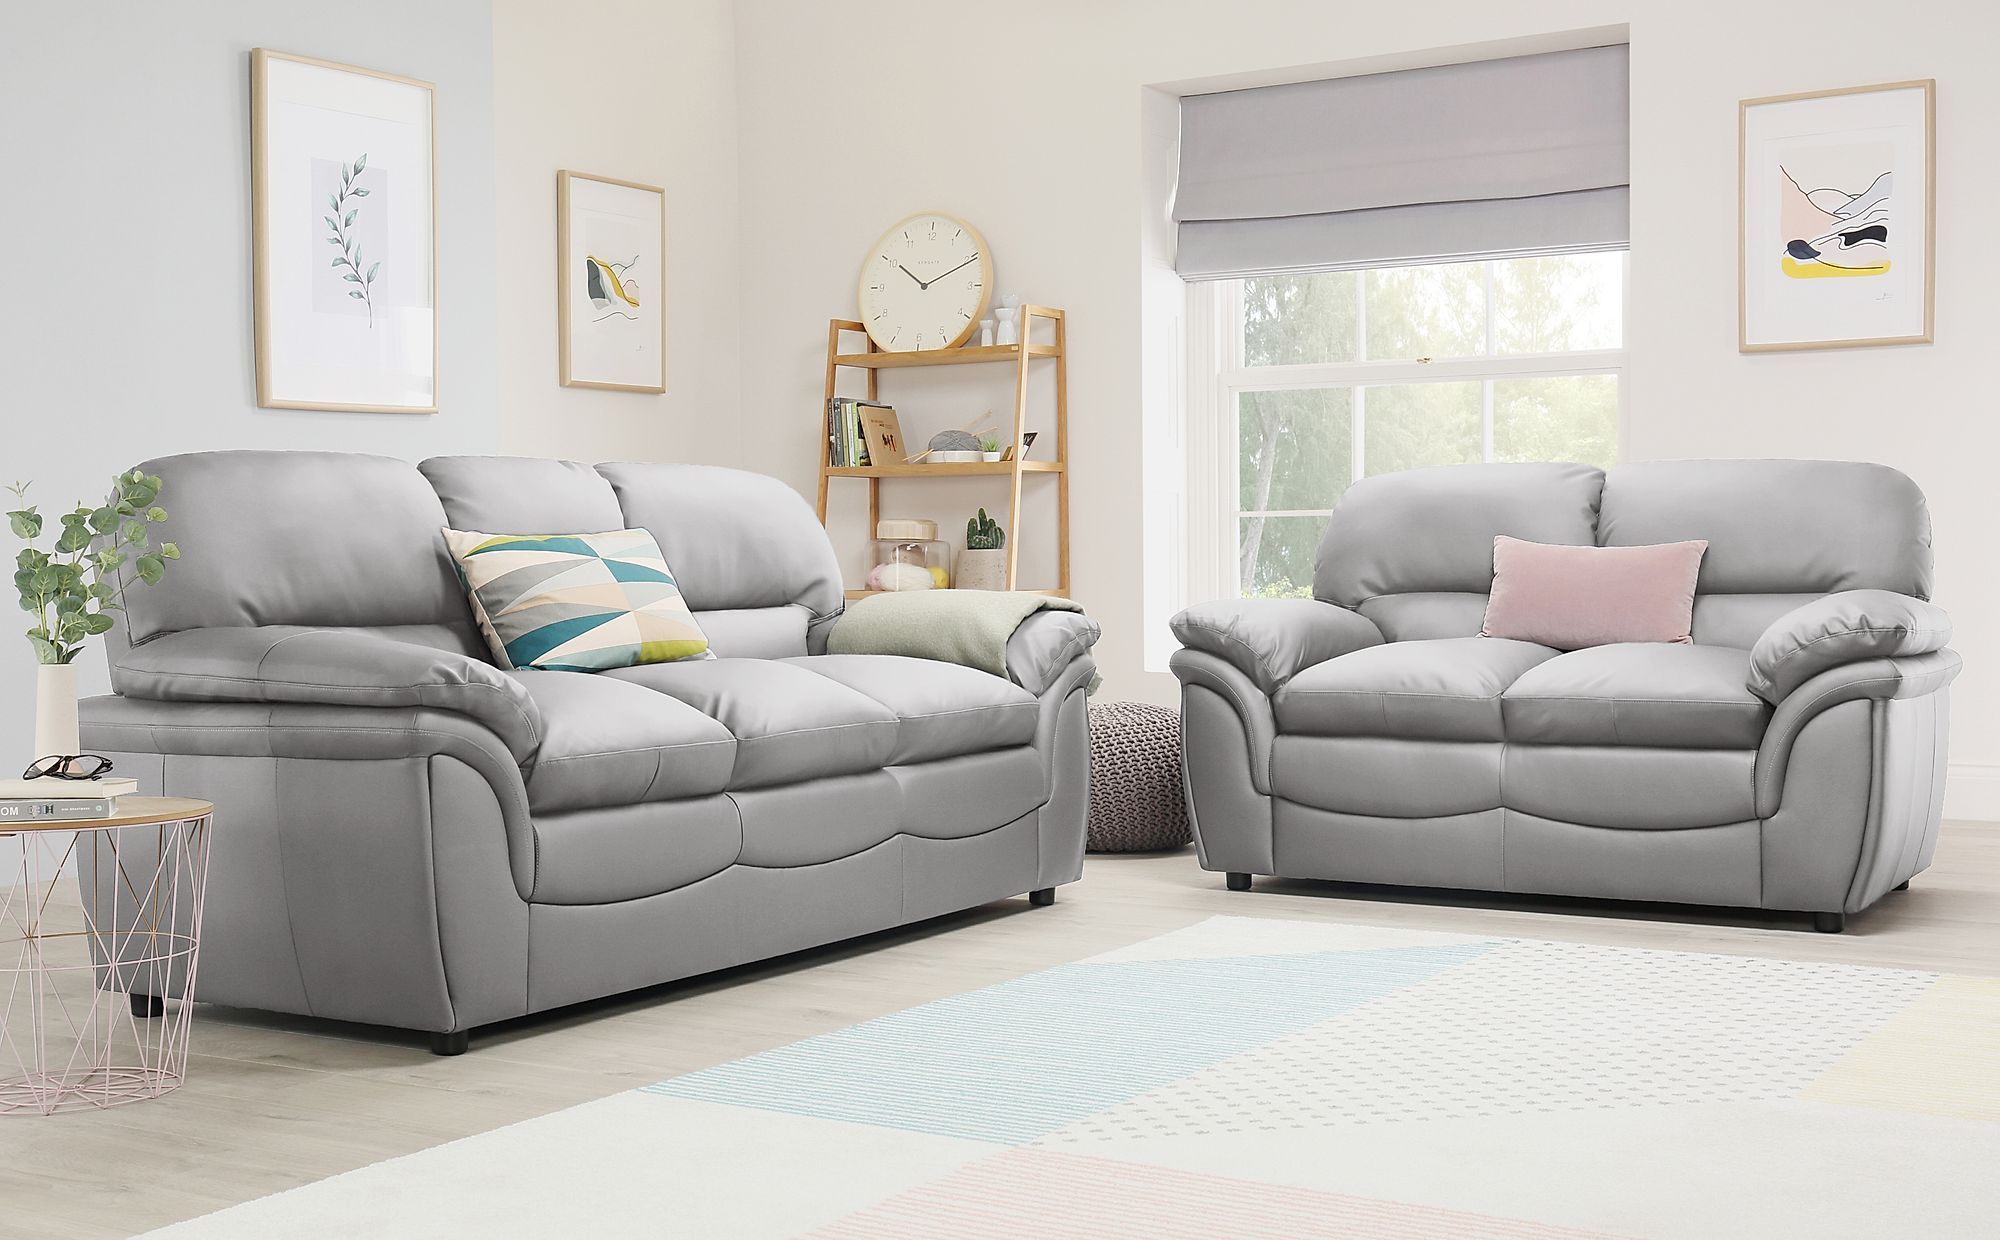 Rochester Light Grey Leather 3+2 Seater Sofa Set | Furniture Choice Throughout Sofas In Light Gray (Gallery 9 of 22)